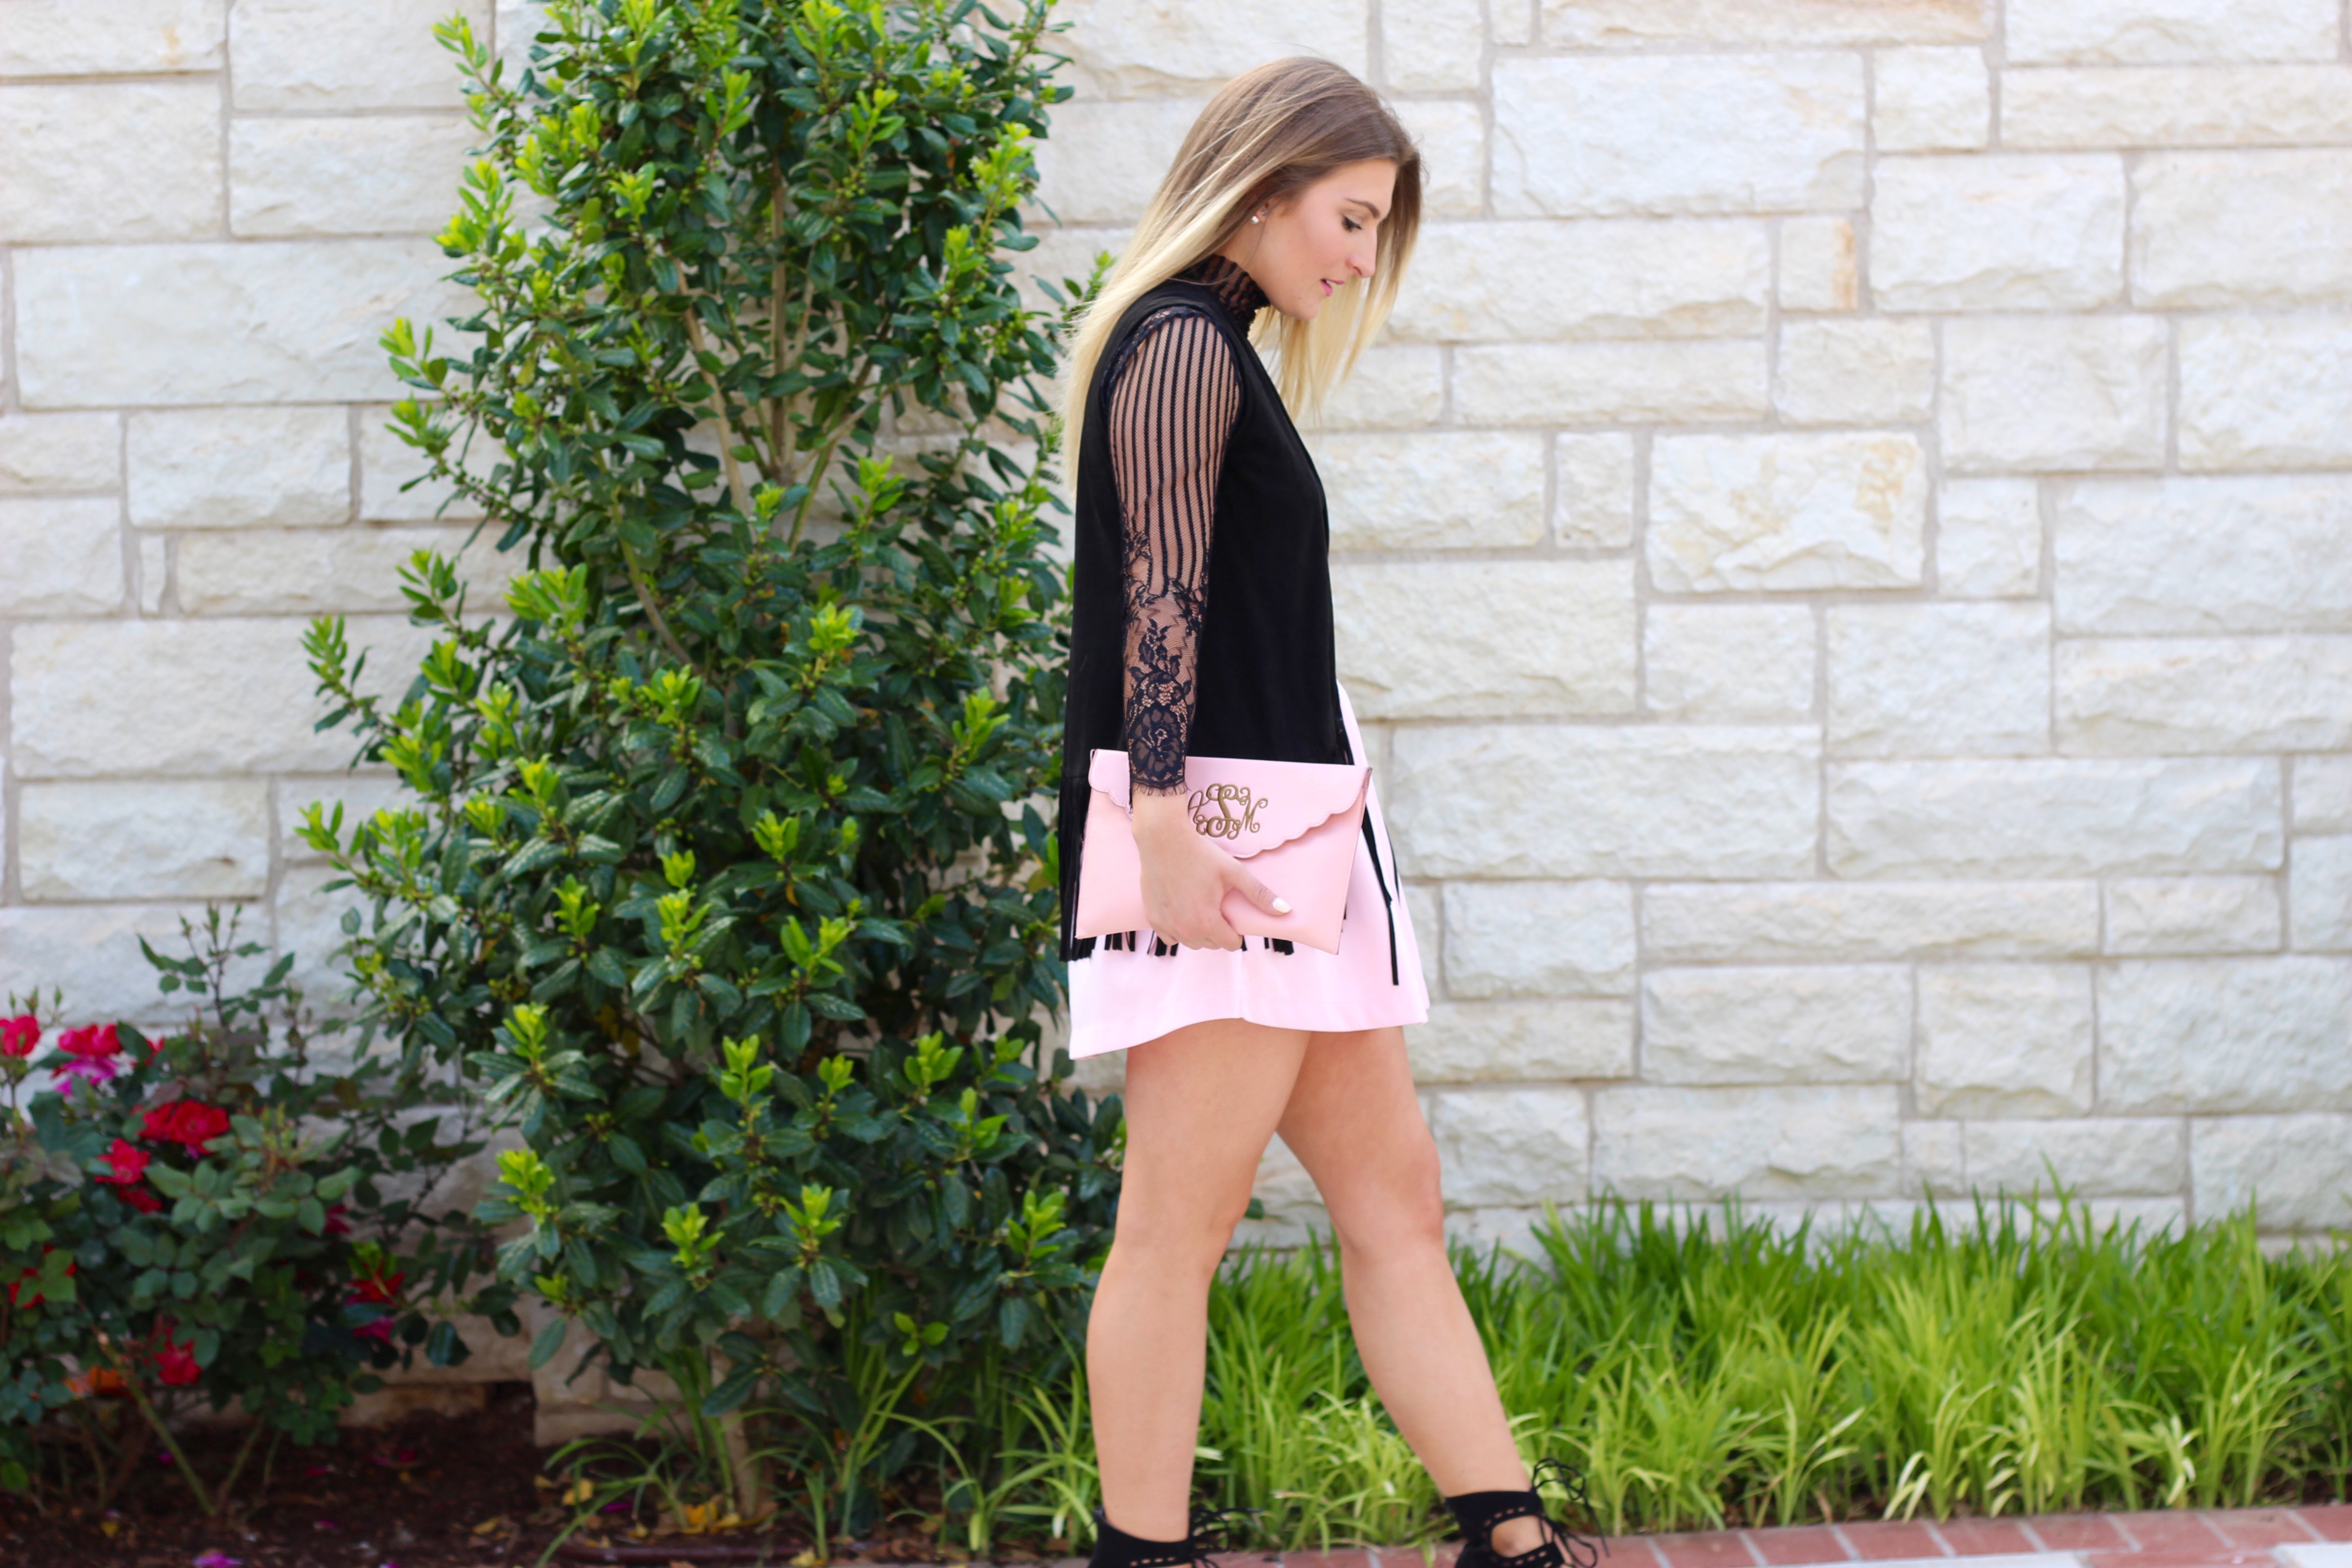 lingerie and a girly skirt - Lingerie Outfit By Day by popular Texas fashion blogger Audrey Madison Stowe